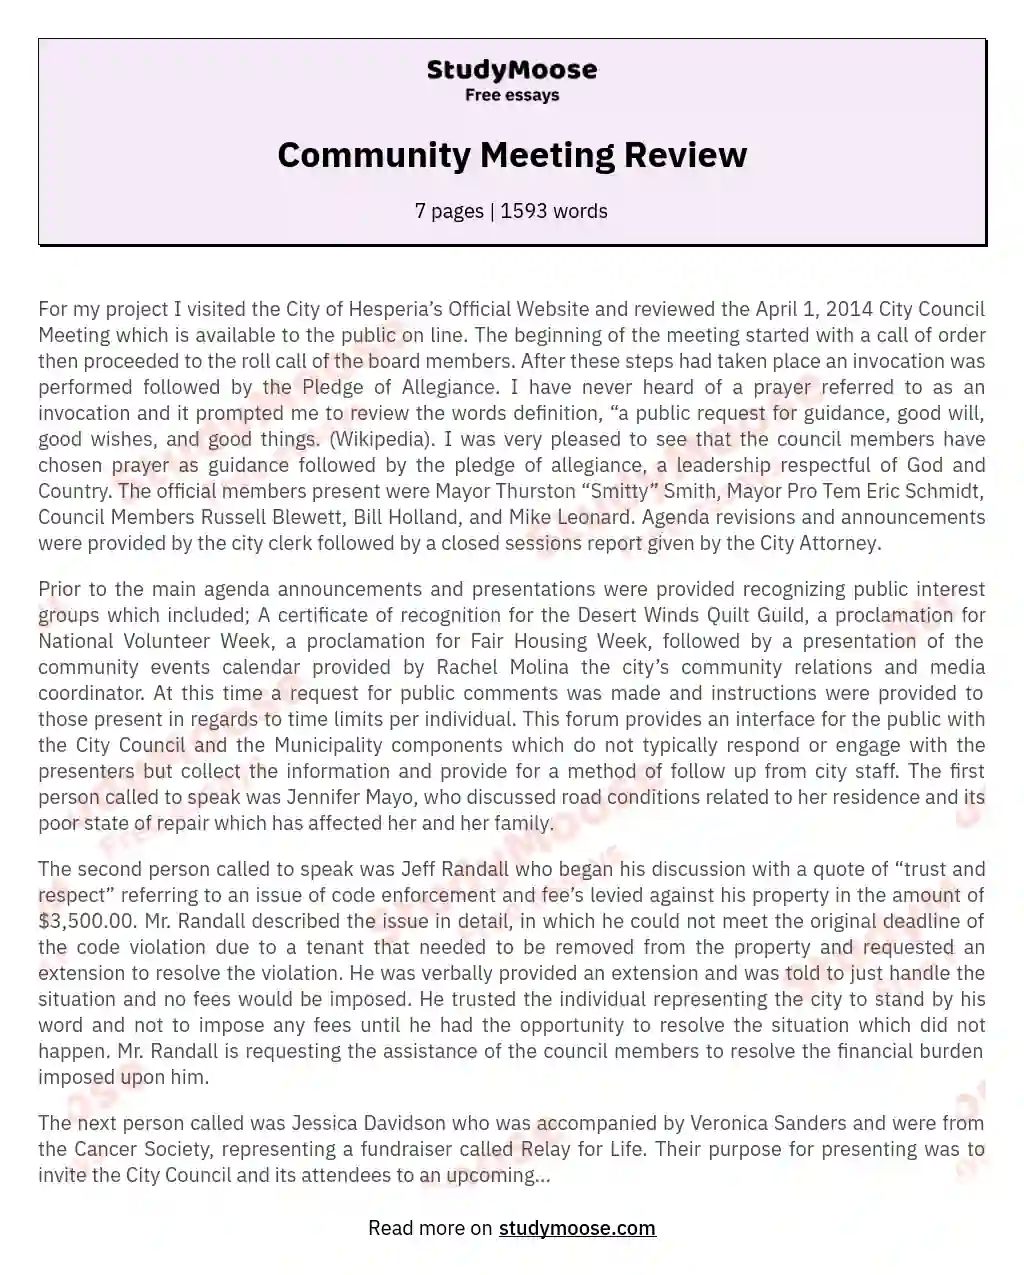 Community Meeting Review essay